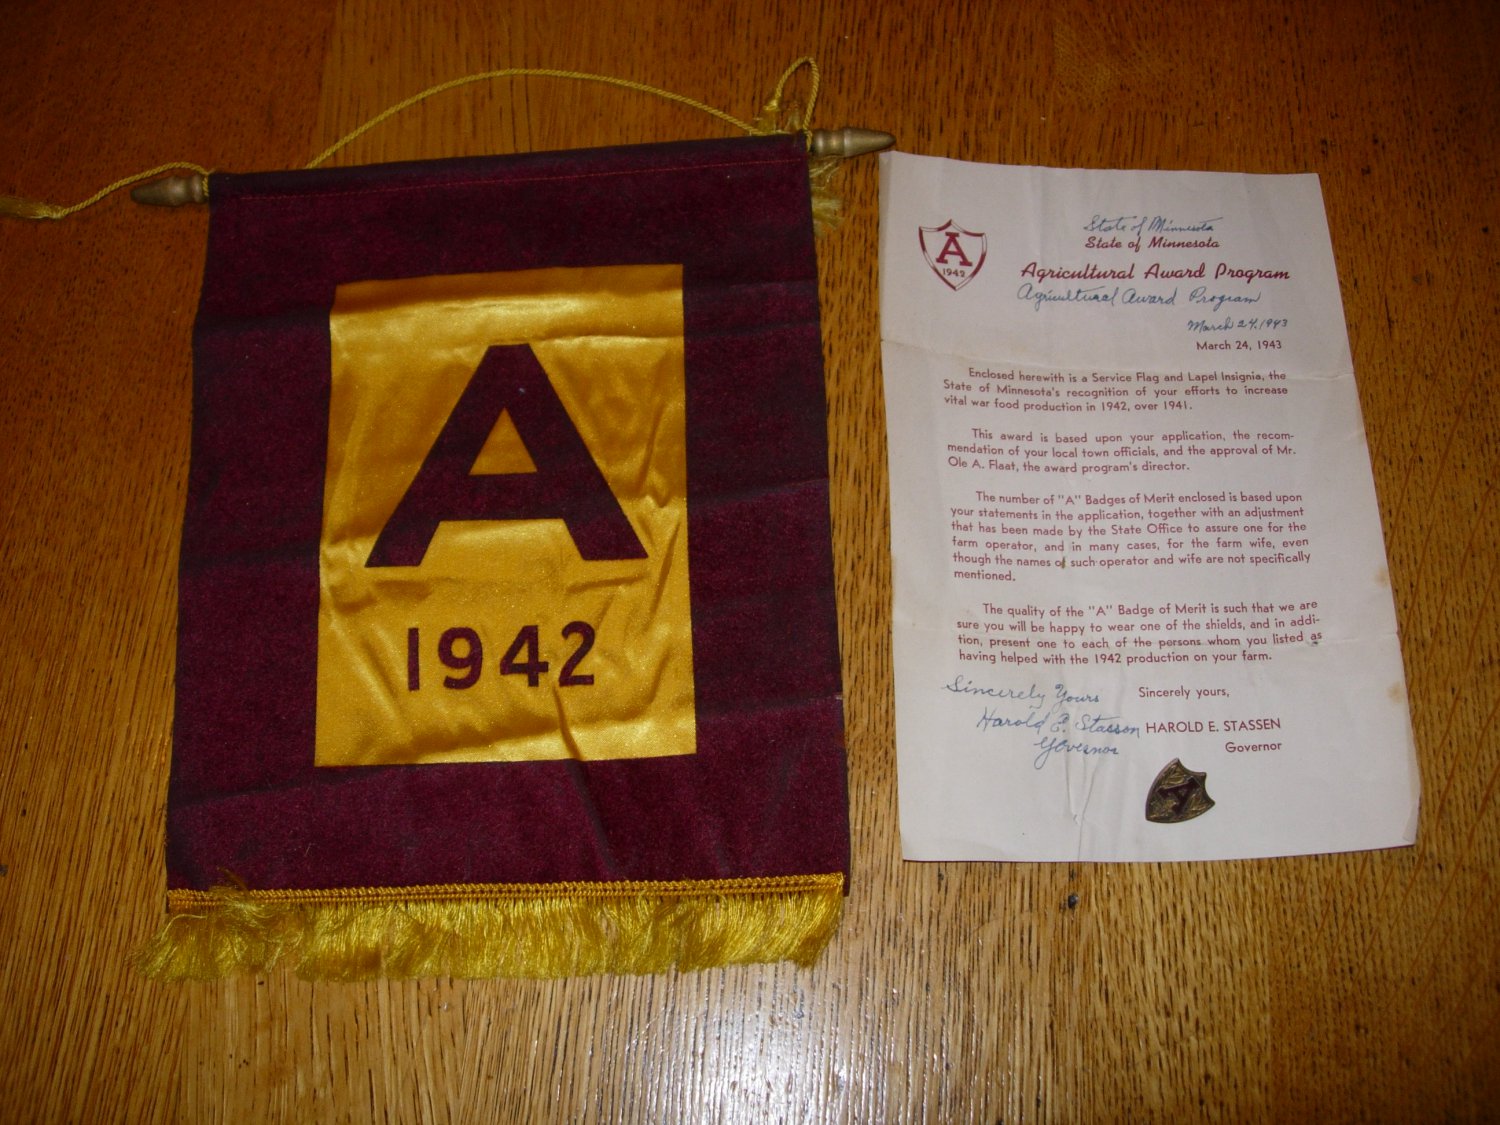 1942 State of Minnesota Agricultural Award-Lapel Pin, Service Flag